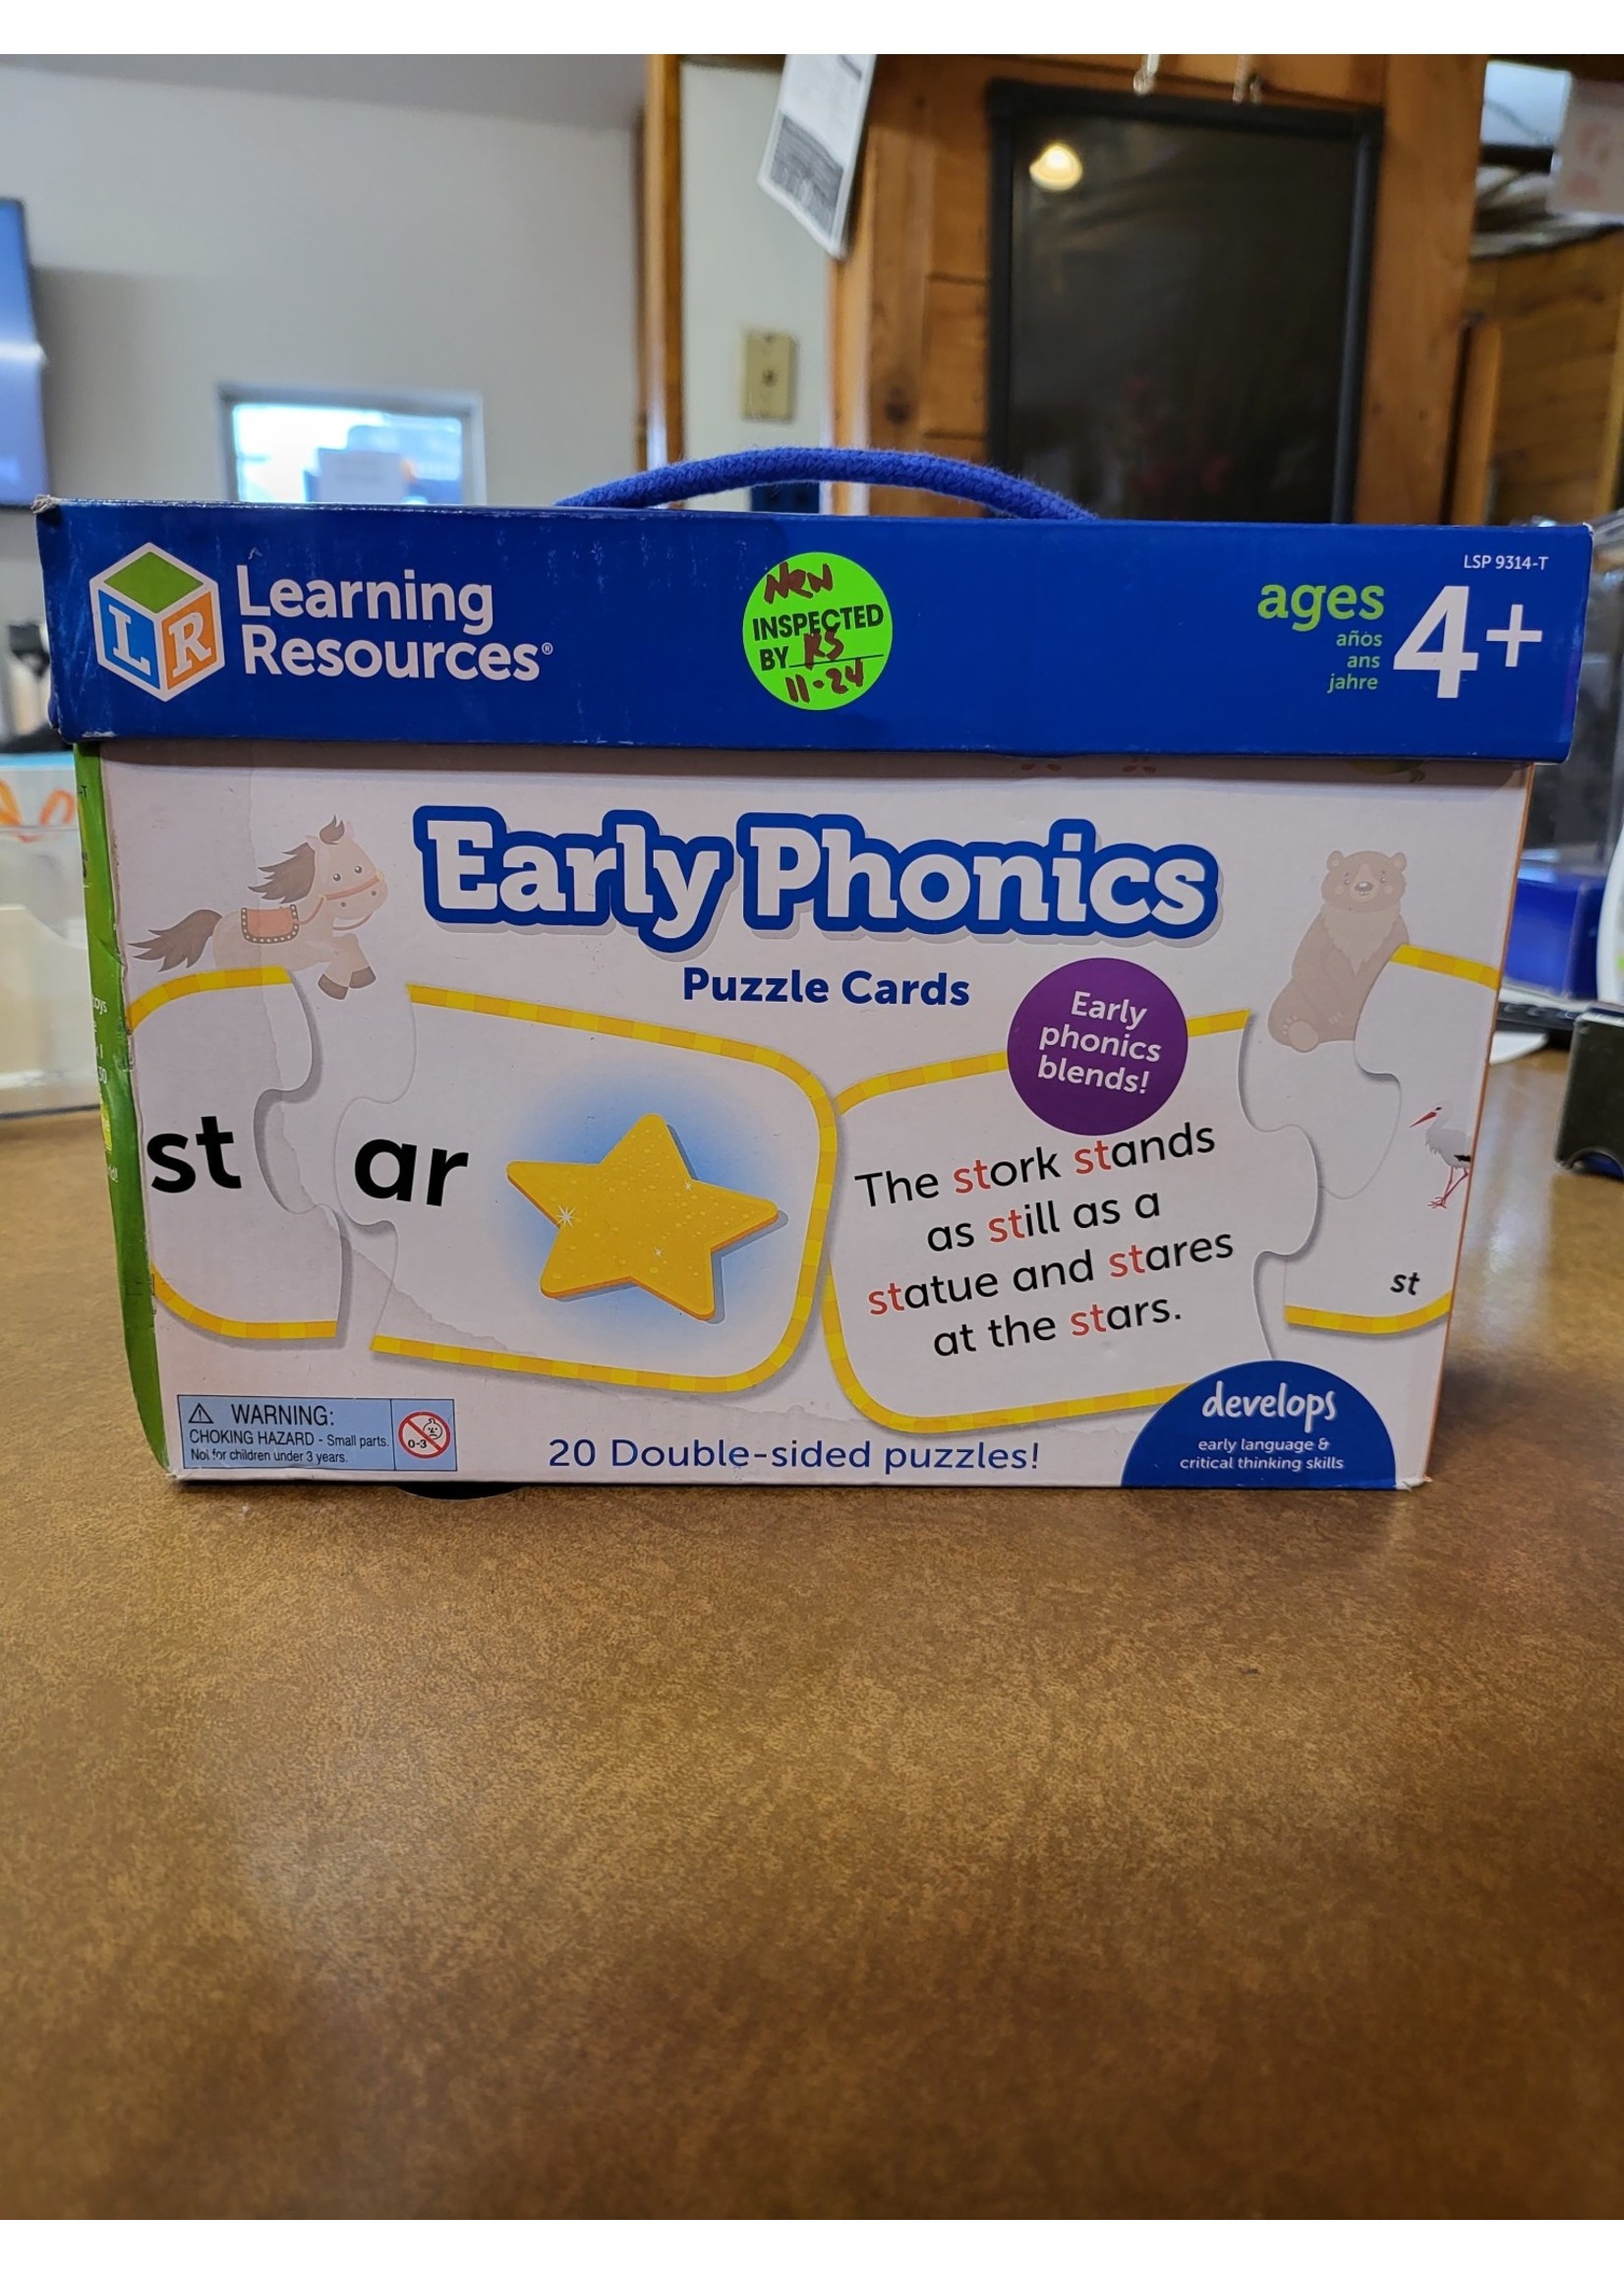 Early Phonics Puzzle Cards - Learning Resources